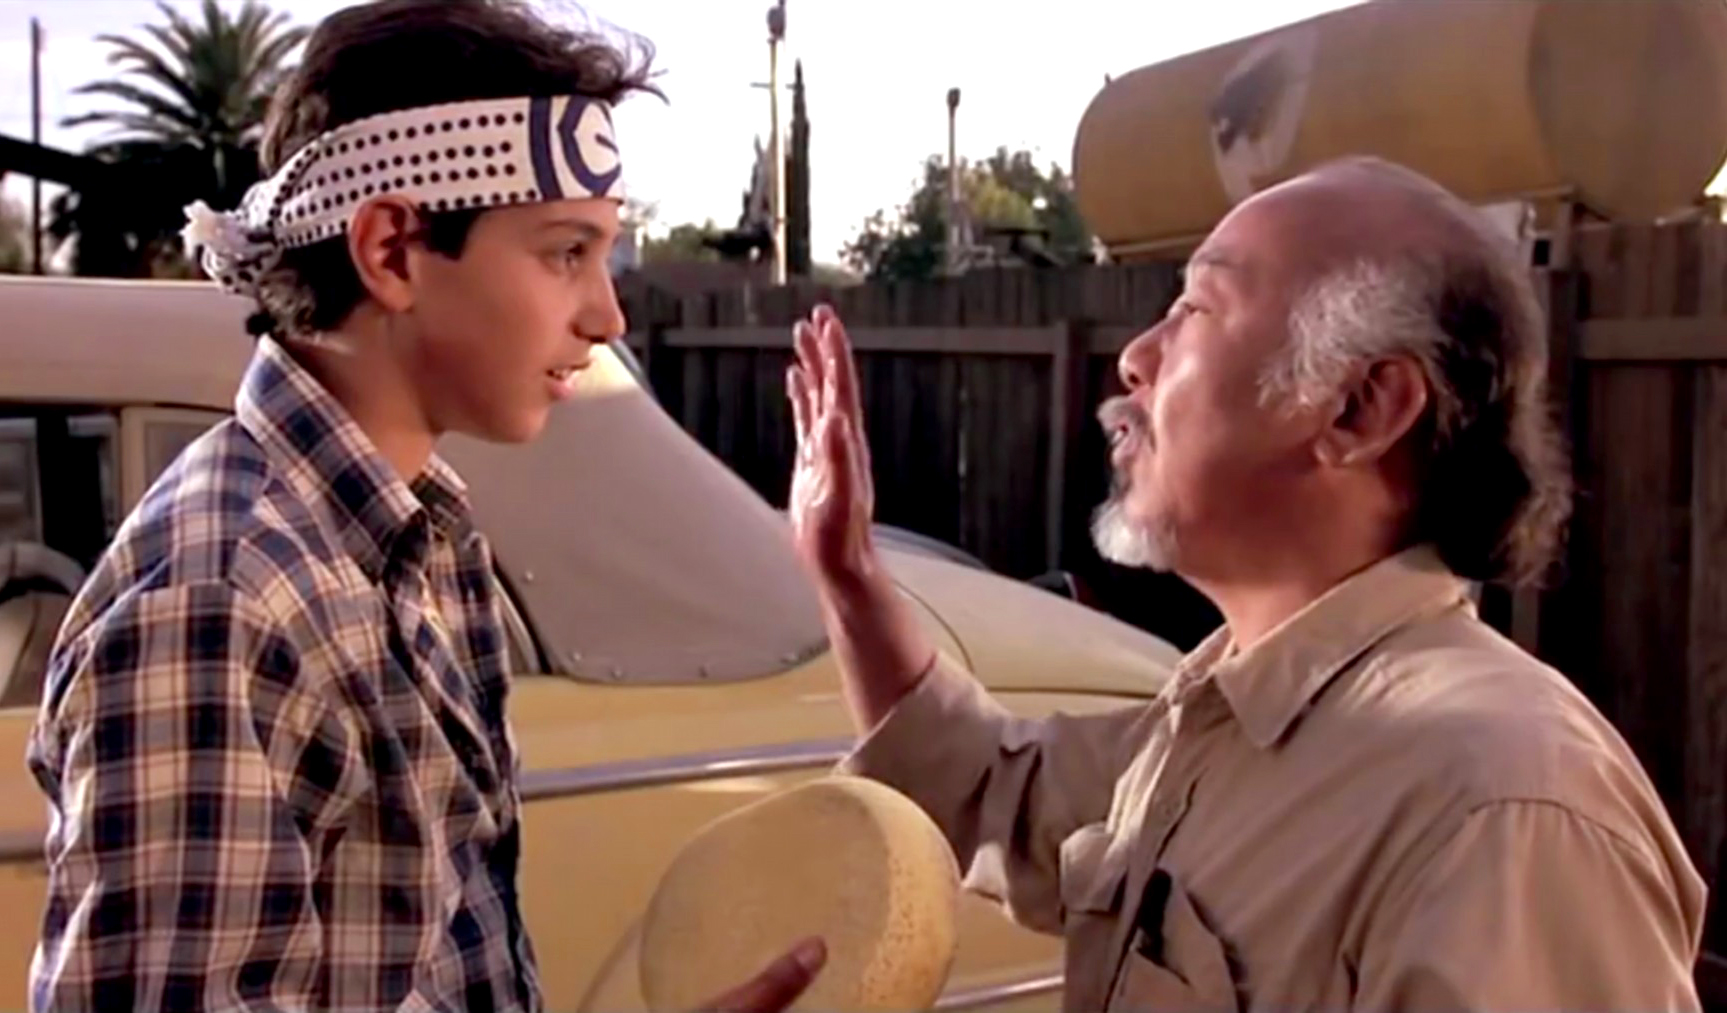 5 Things THE KARATE KID Taught Me About Parenting